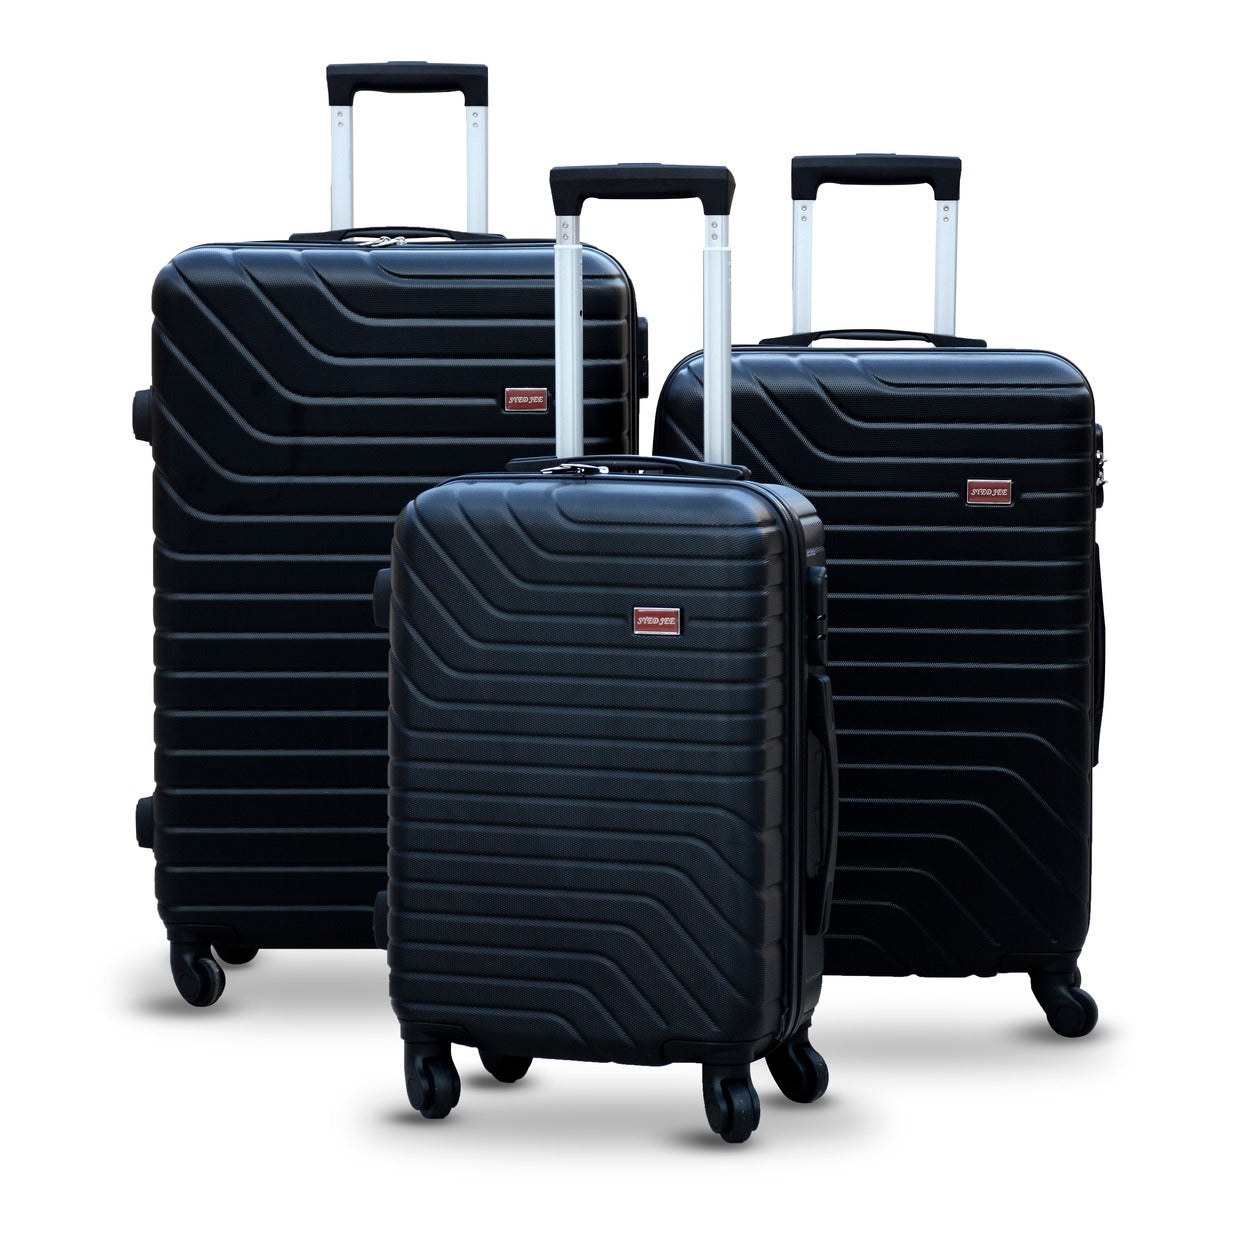 3 Pcs Full Set Black SJ New ABS Lightweight Travel Luggage 20" 24" 28 Inches Hard case Trolley Baggage